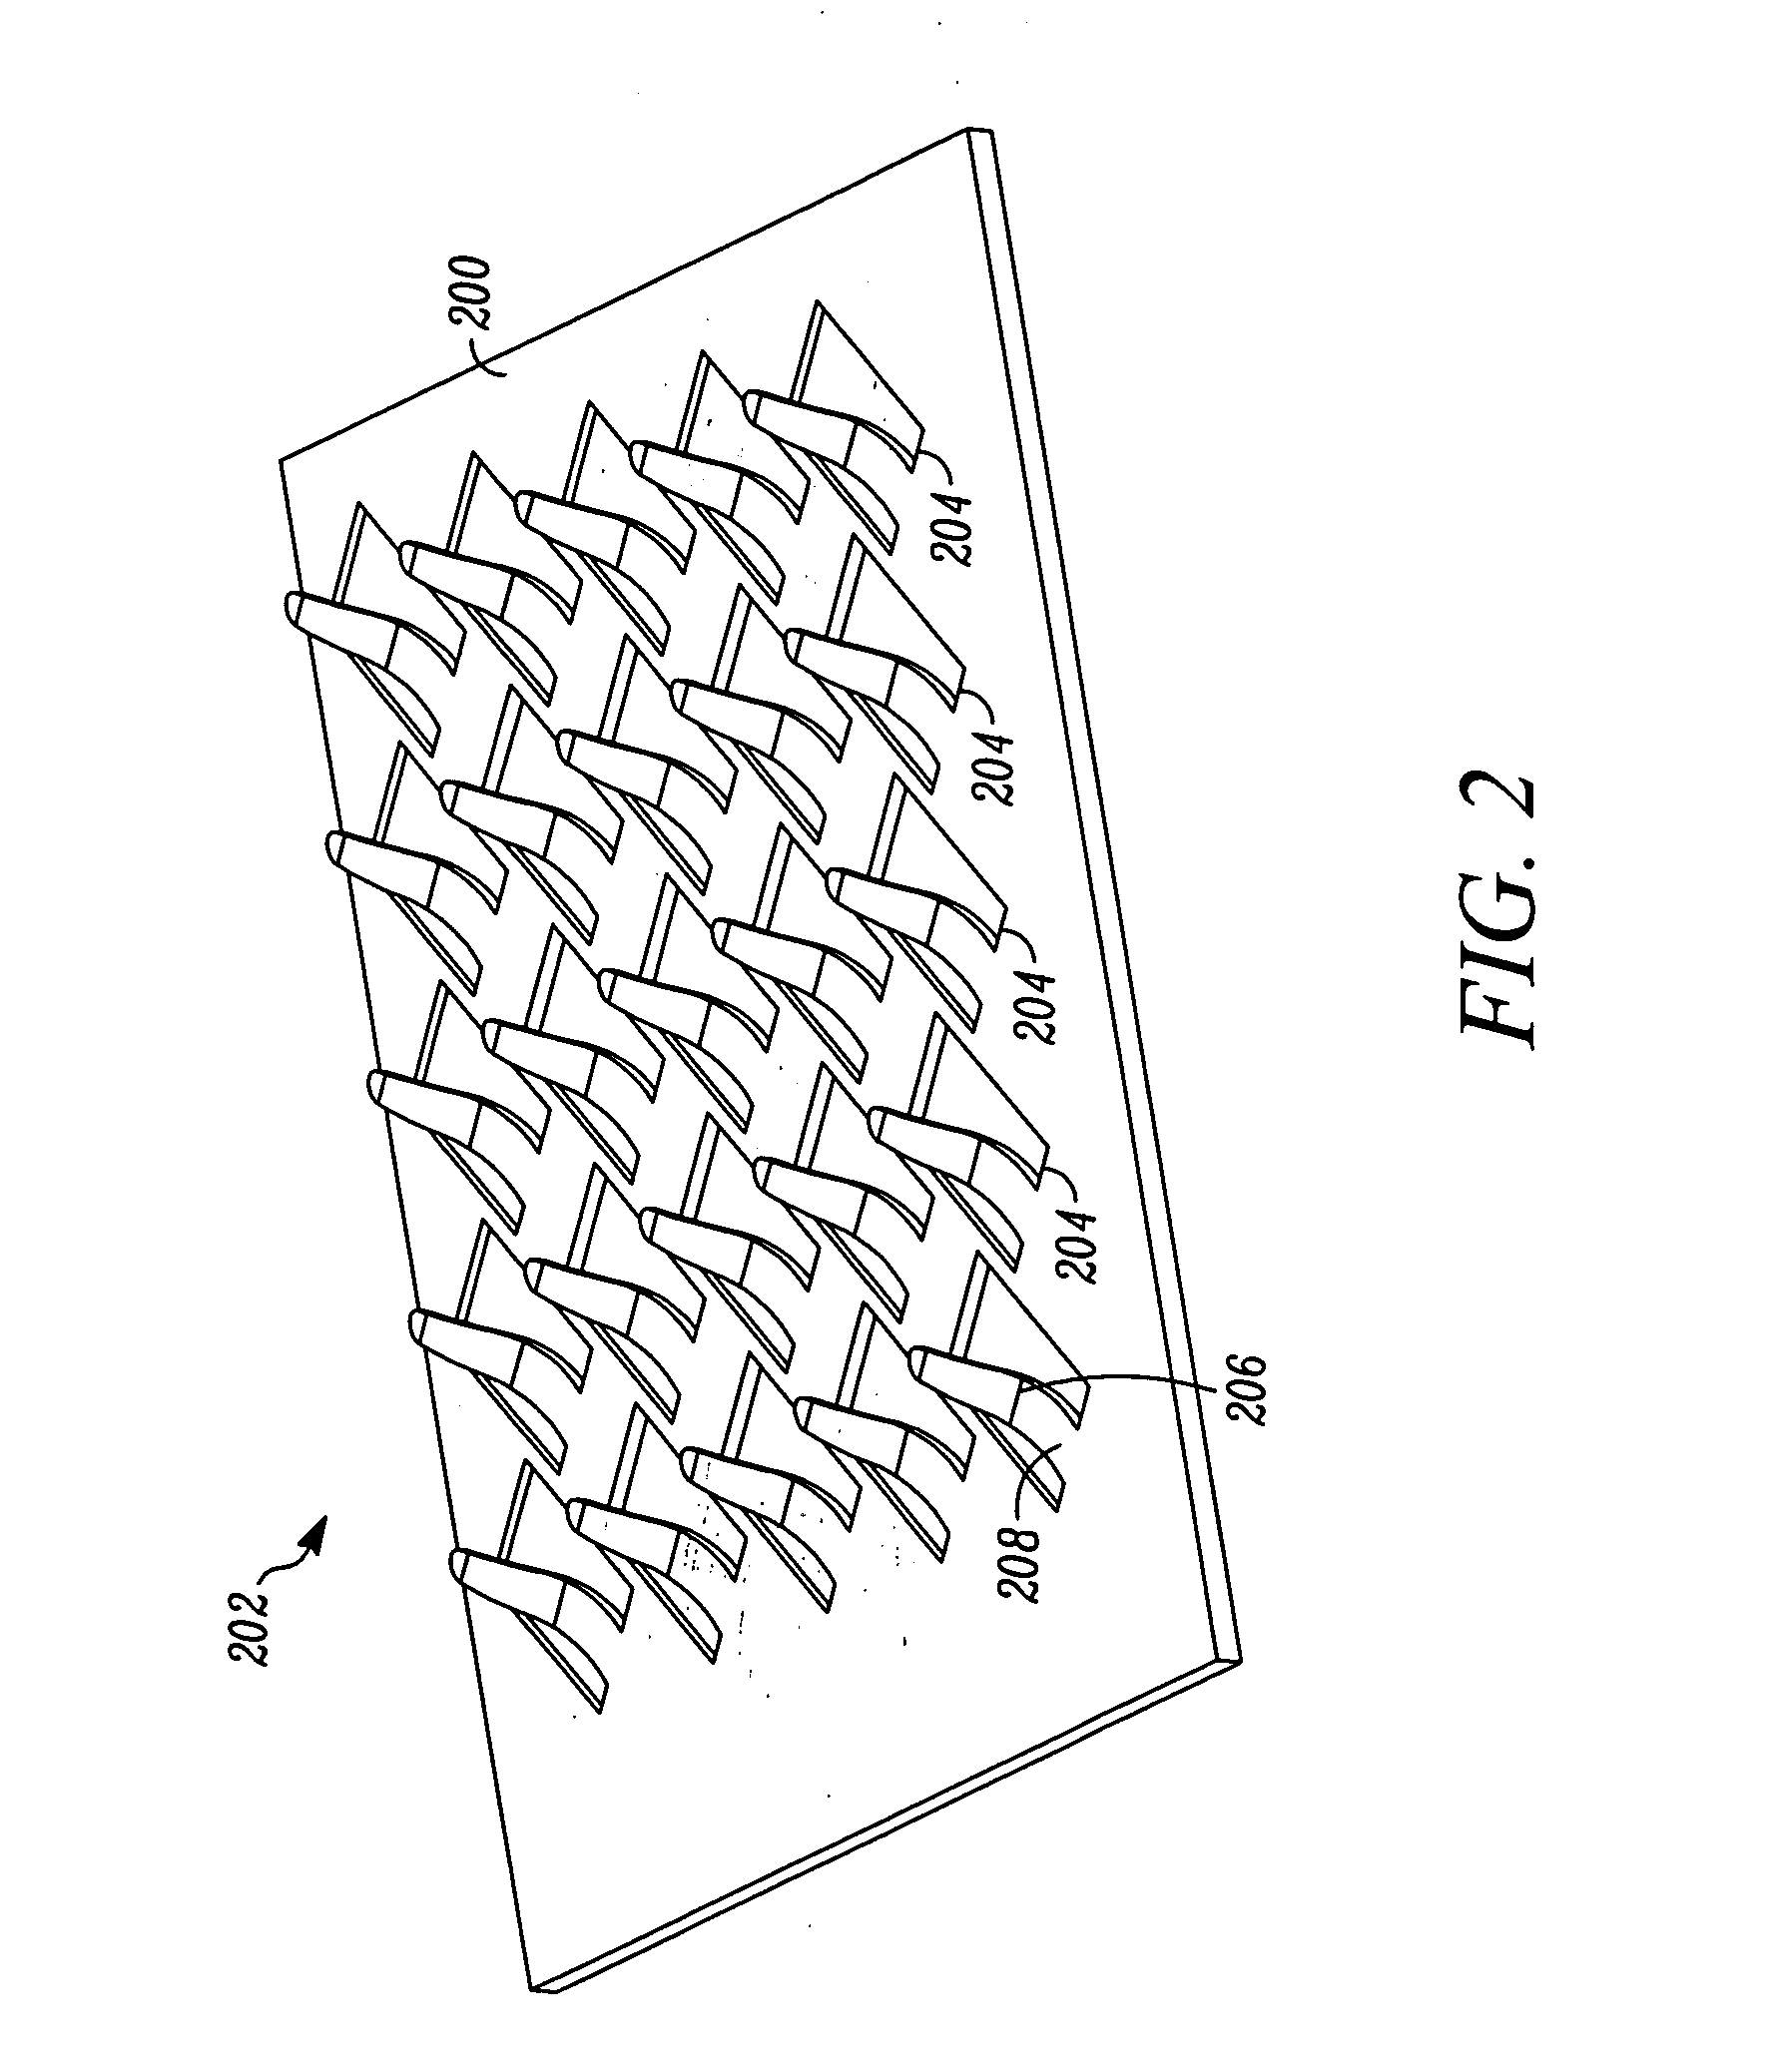 Contact grid array system